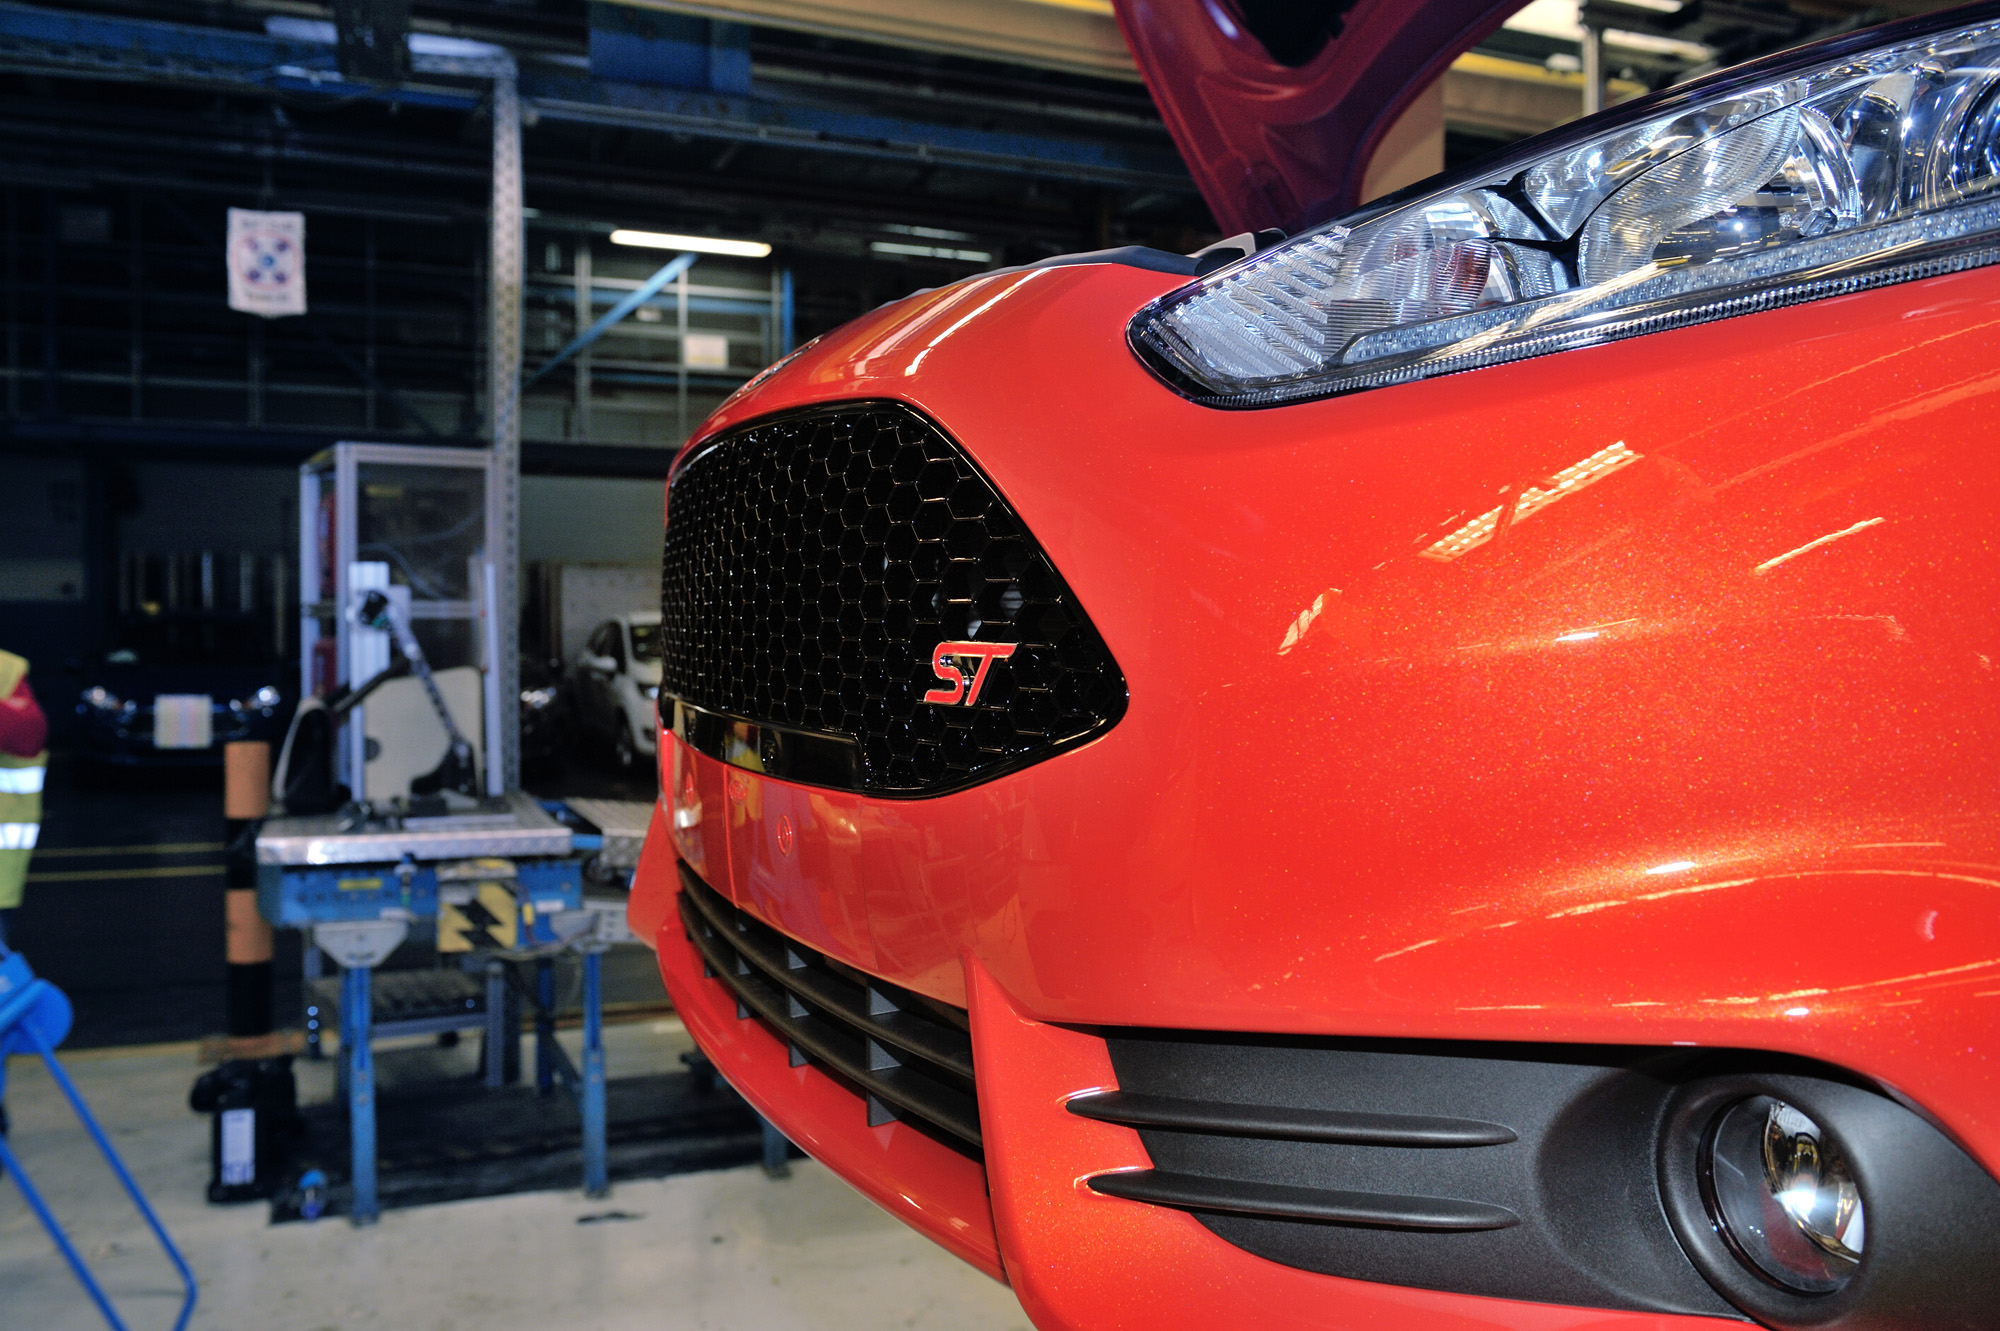 Ford Begins Production of Fastest-Ever Fiesta; Sub-7 Second New